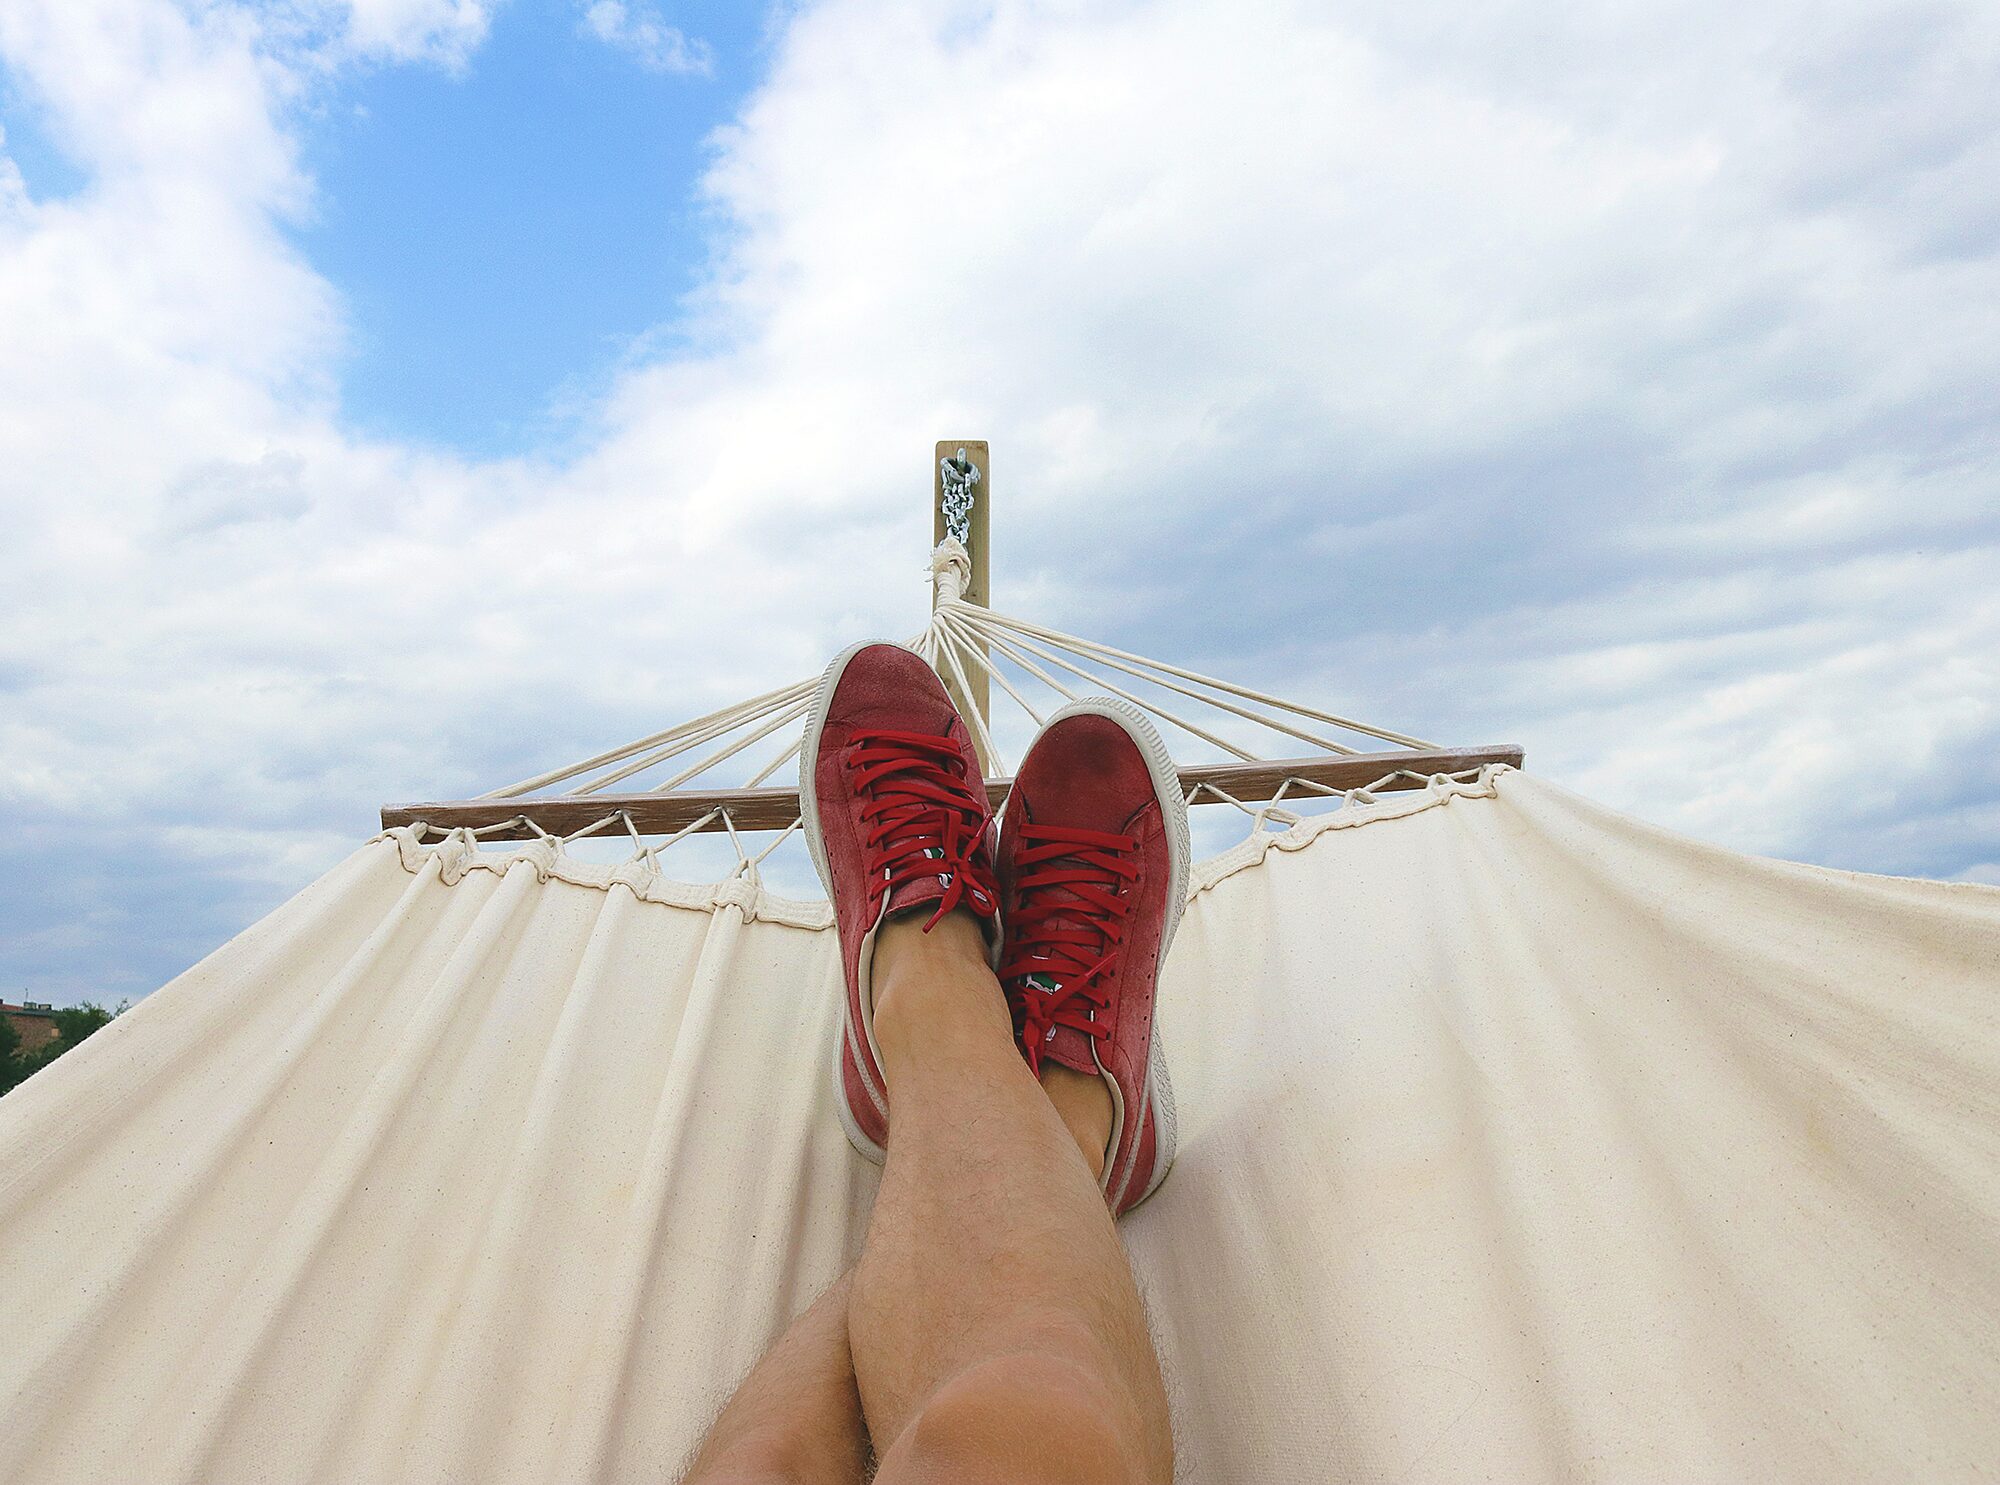 viewpoint-of-person's-shoes-on-a-hammock